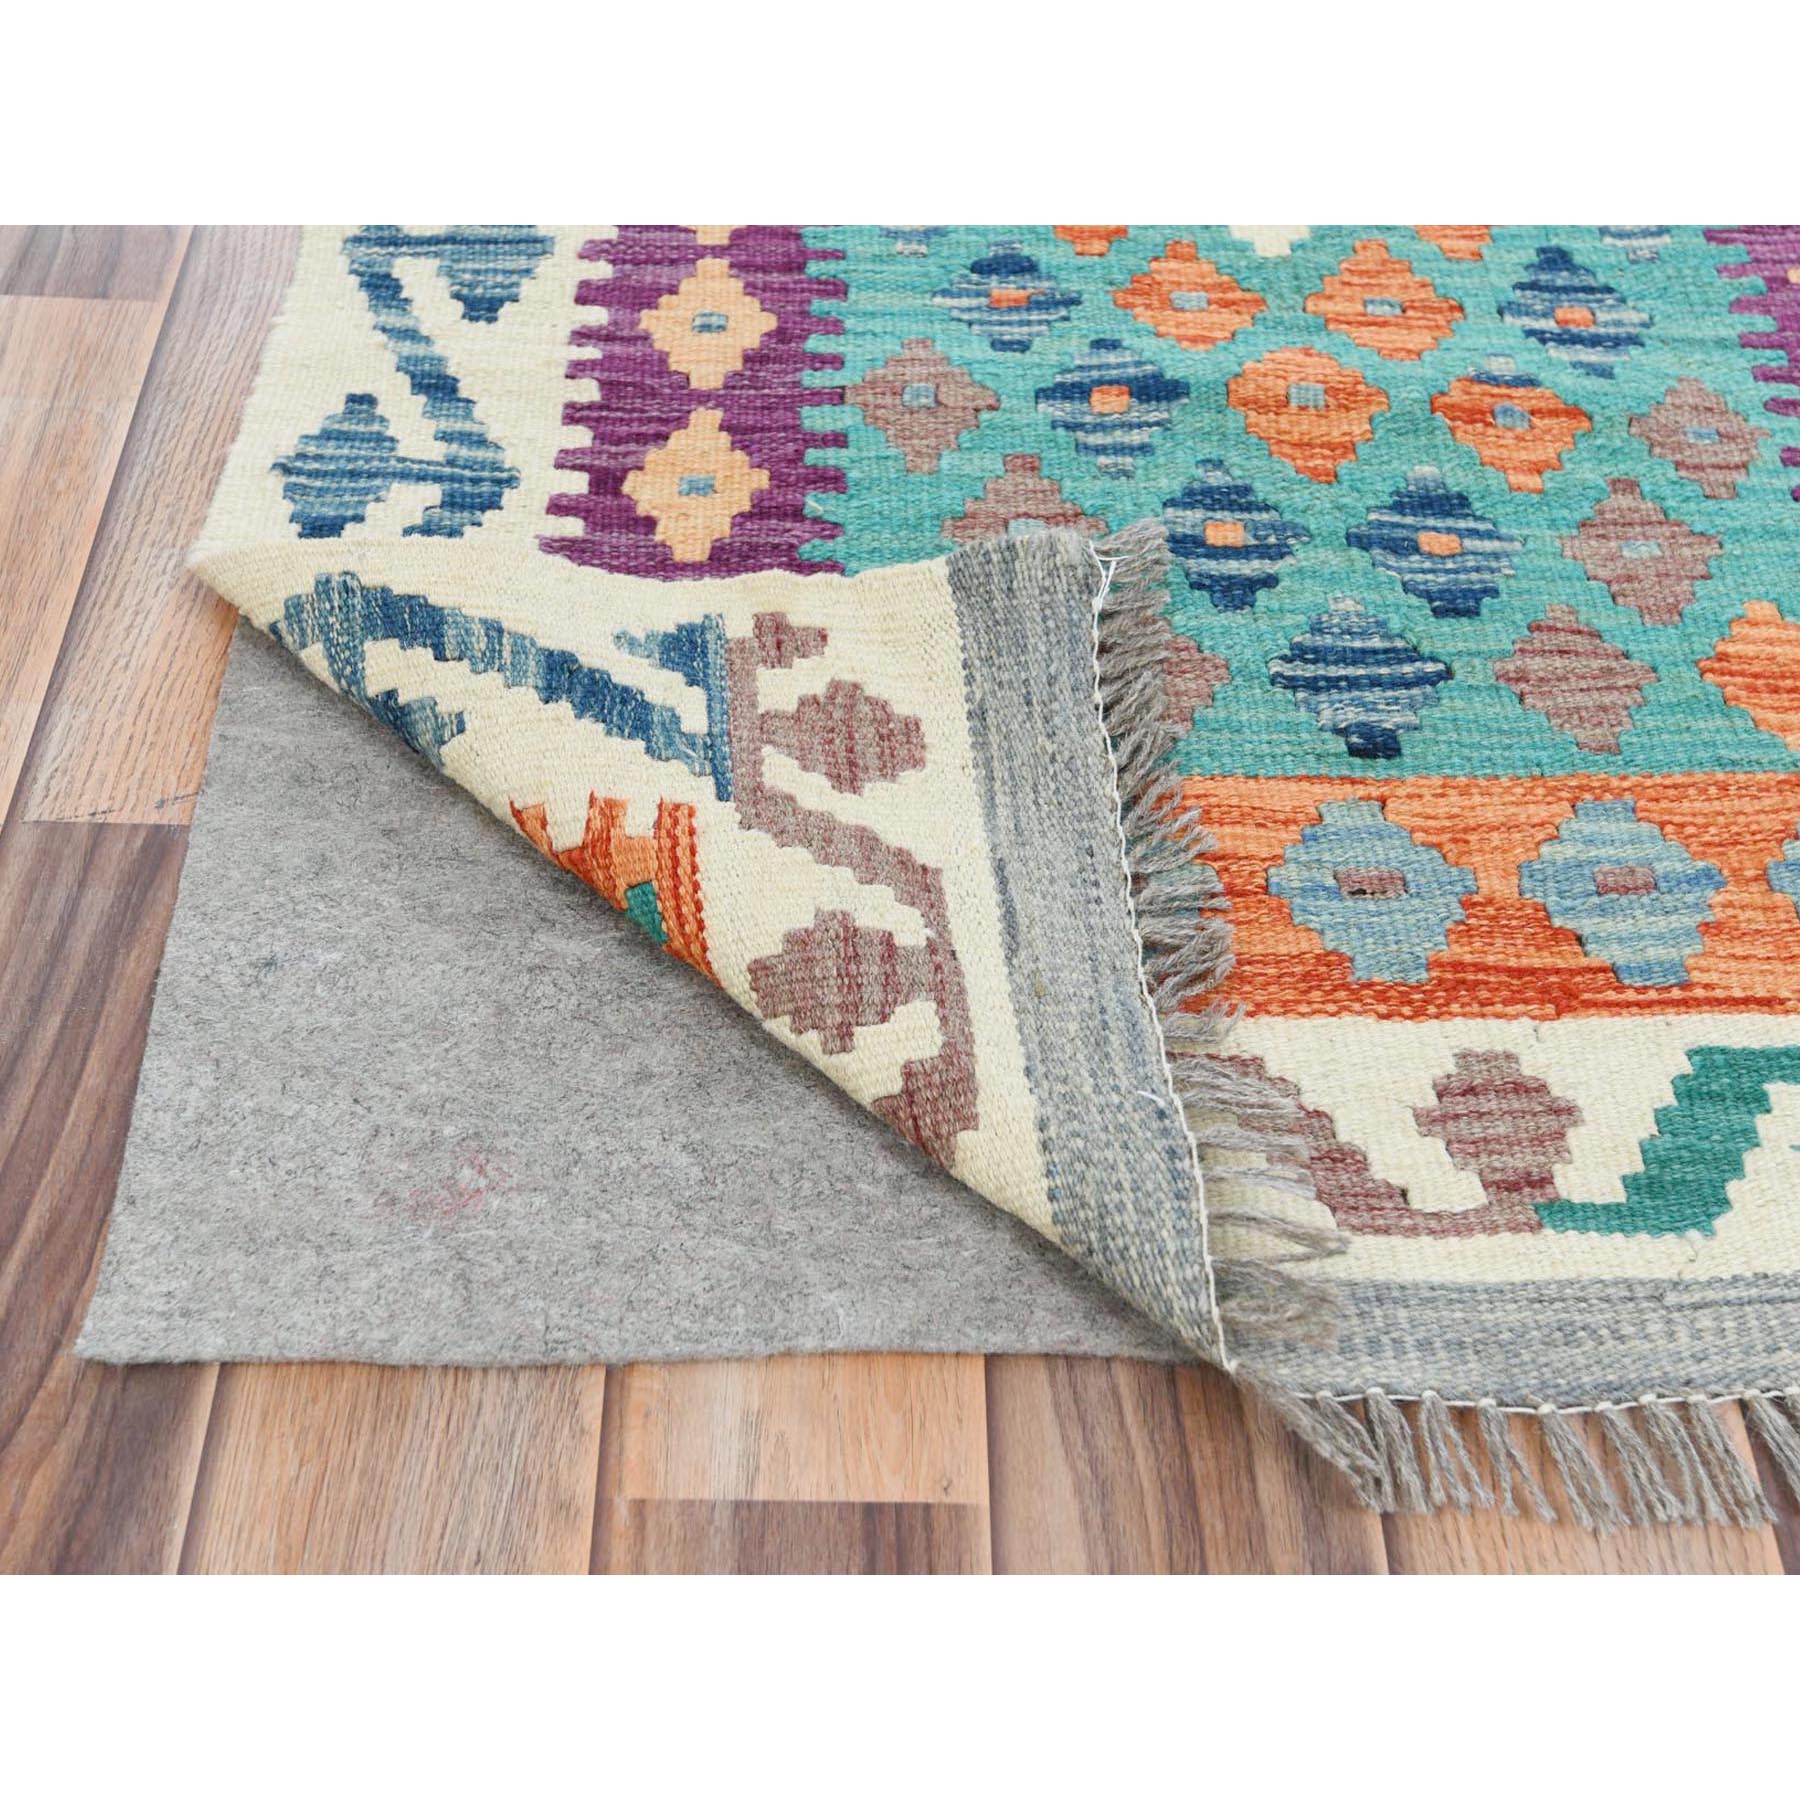 2'5"x16'3" Colorful, Afghan Kilim with Geometric Design, Pure Wool, Hand Woven, Vegetable Dyes, Flat Weave, Reversible XL Runner Oriental Rug 